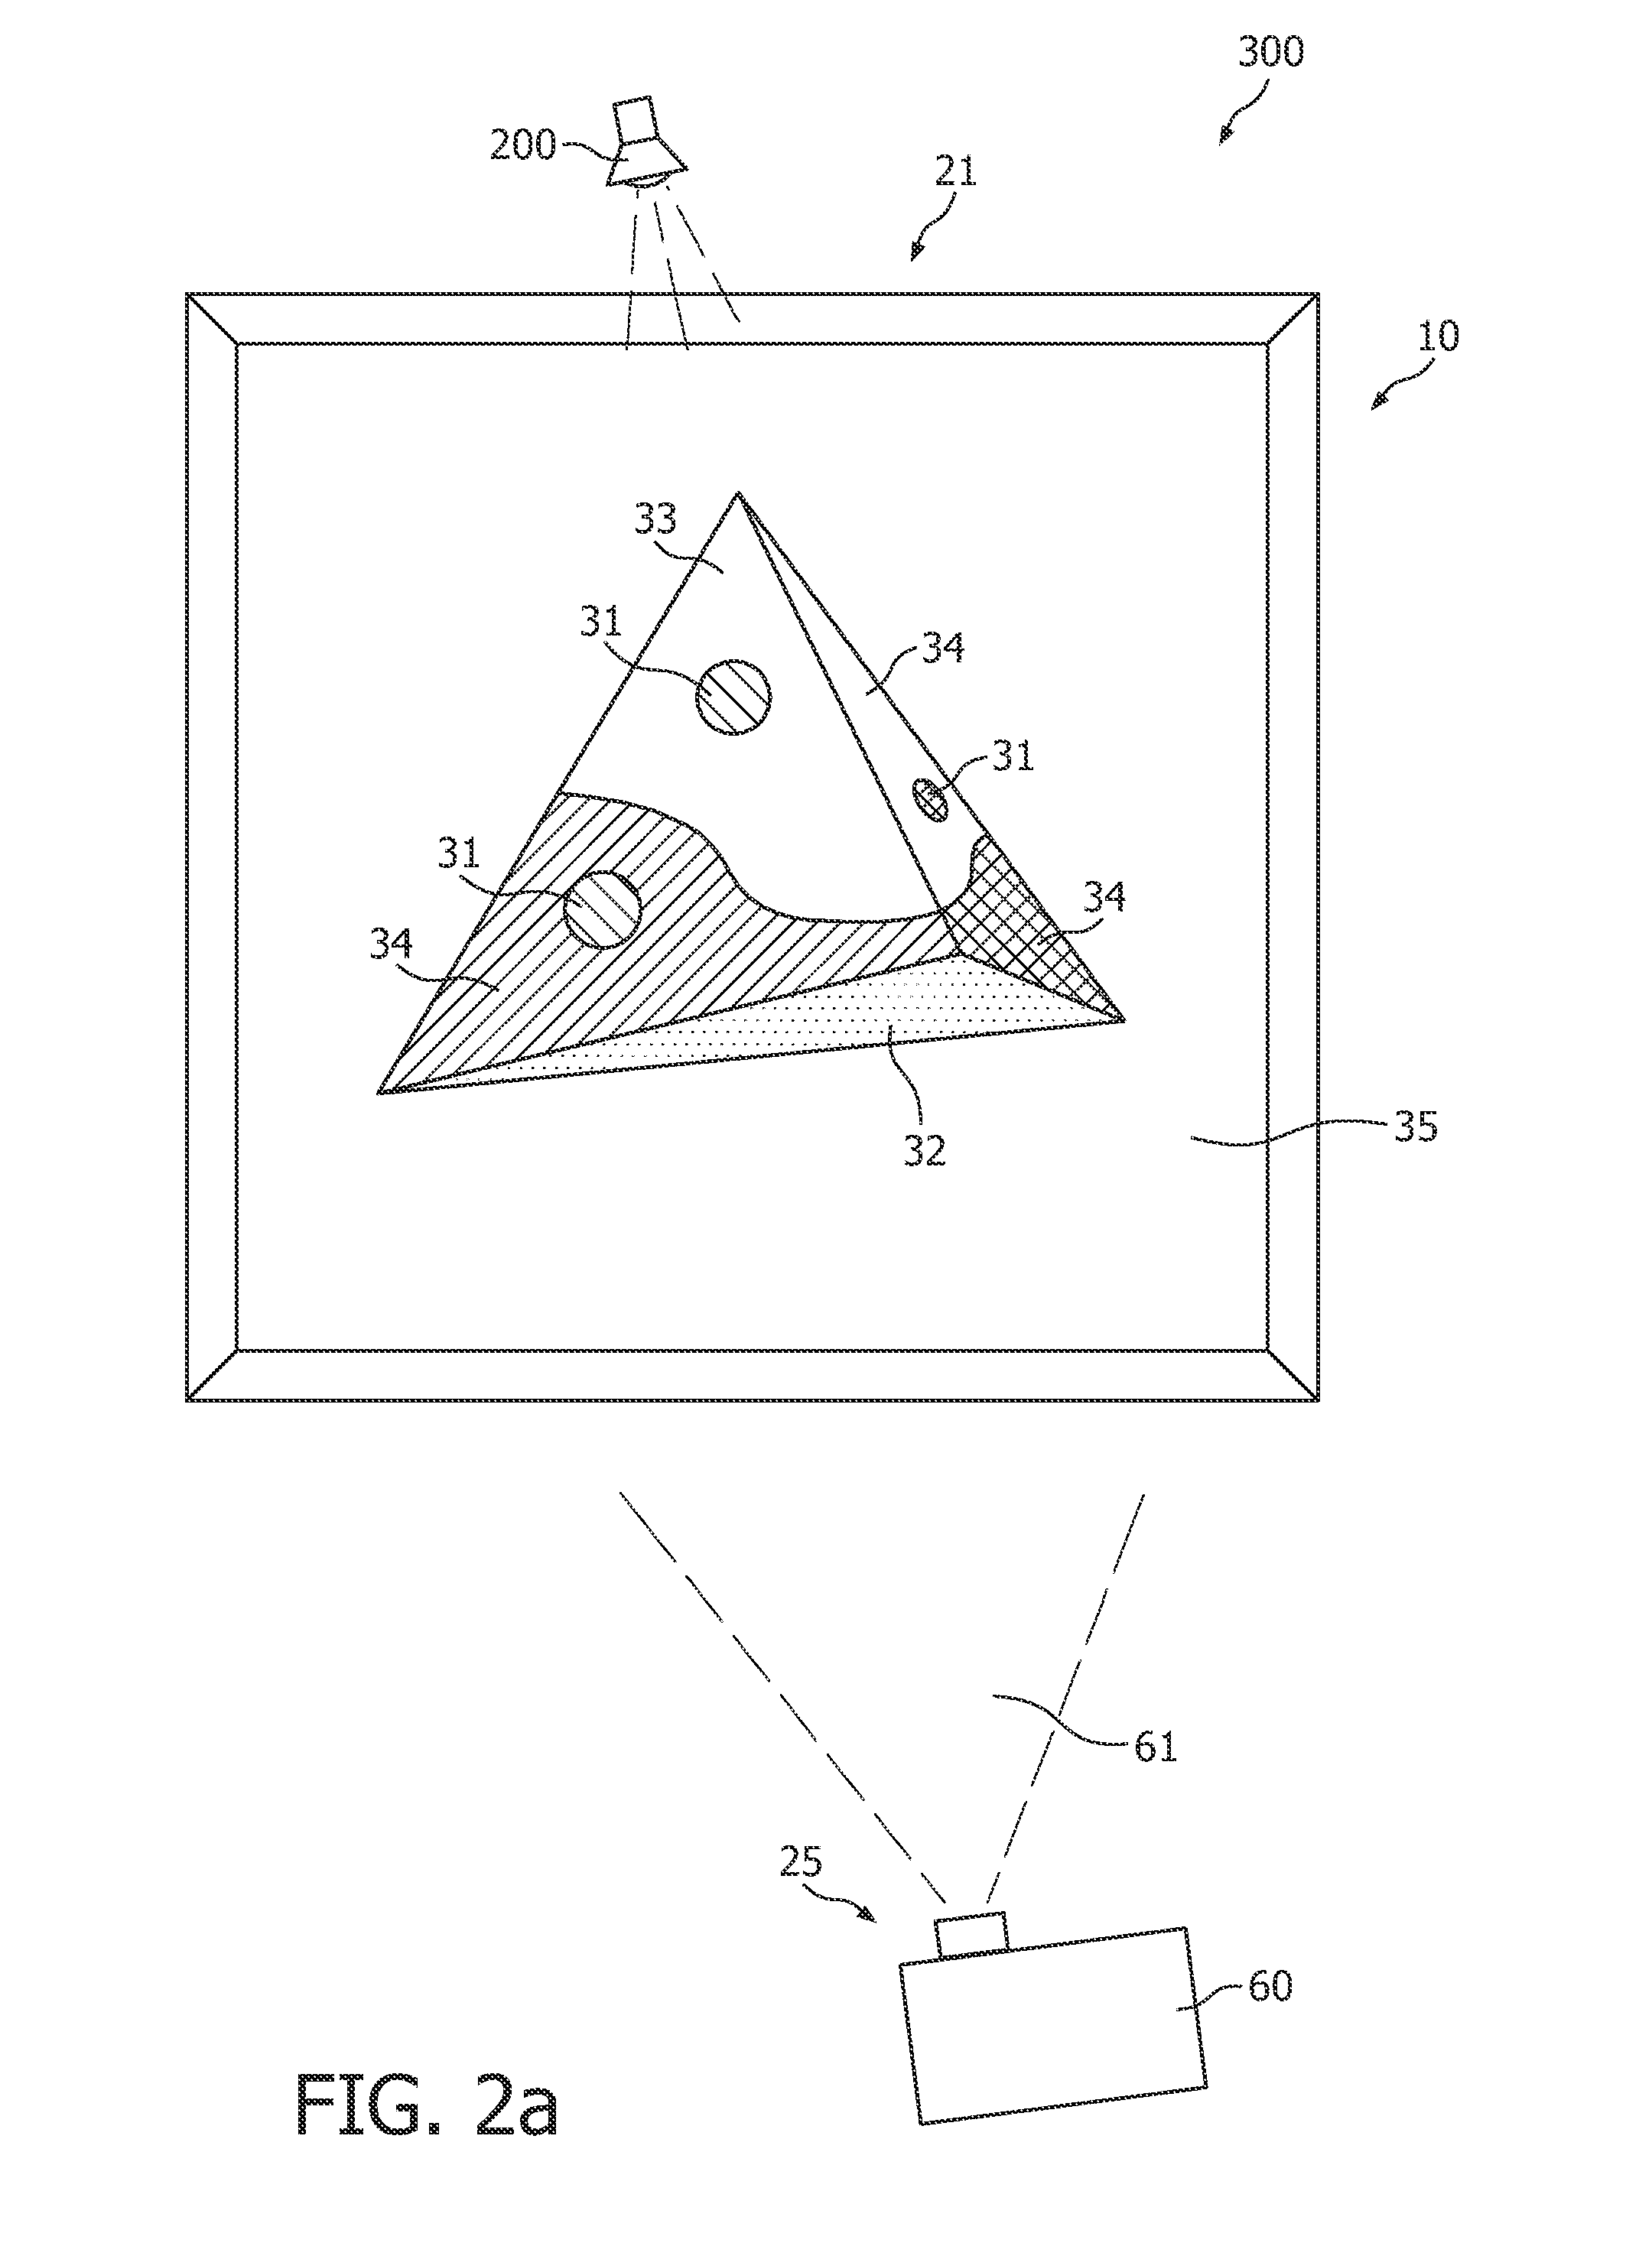 Method of illuminating a 3D object with a modified 2D image of the 3D object by means of a projector, and projector suitable for performing such a method